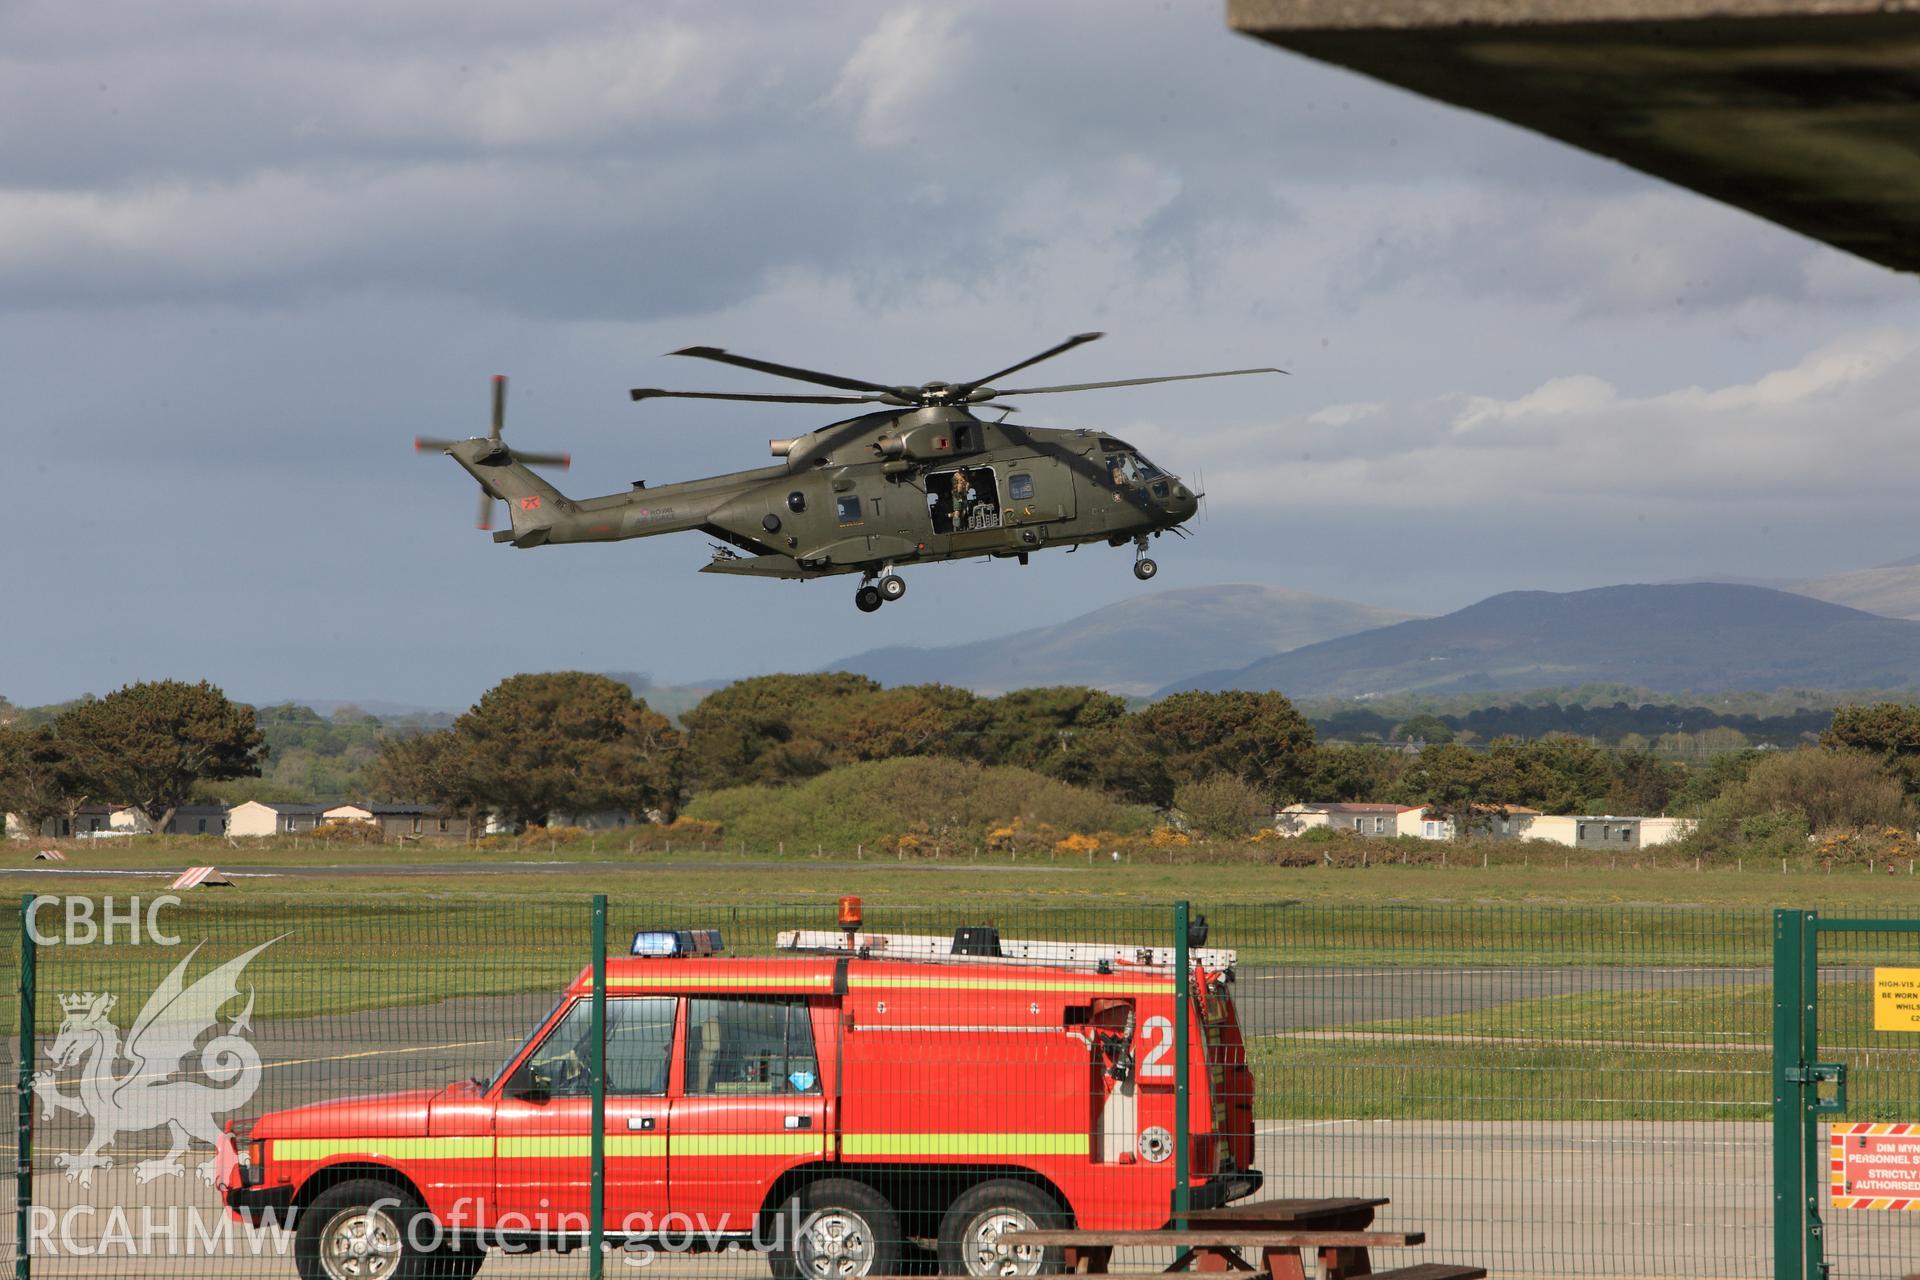 Roayl Air Force Merlin landing at Caernarfon airfield. Oblique aerial photograph taken during the Royal Commission?s programme of archaeological aerial reconnaissance by Toby Driver on 22nd May 2013.